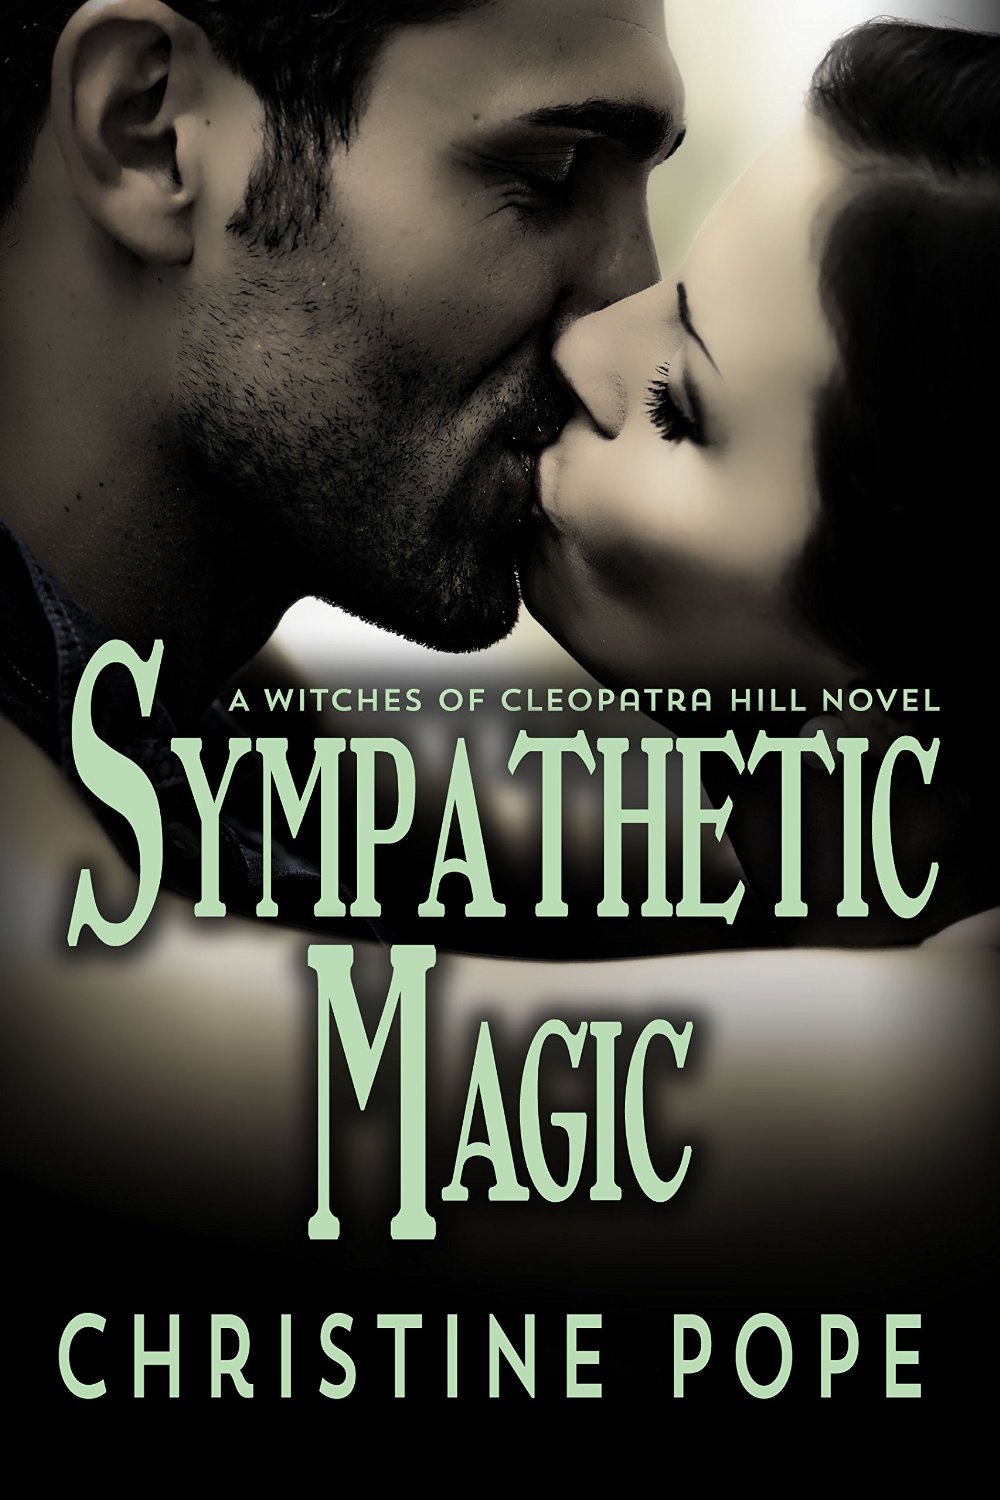 Sympathetic Magic (The Witches of Cleopatra Hill Book 4) by Christine Pope